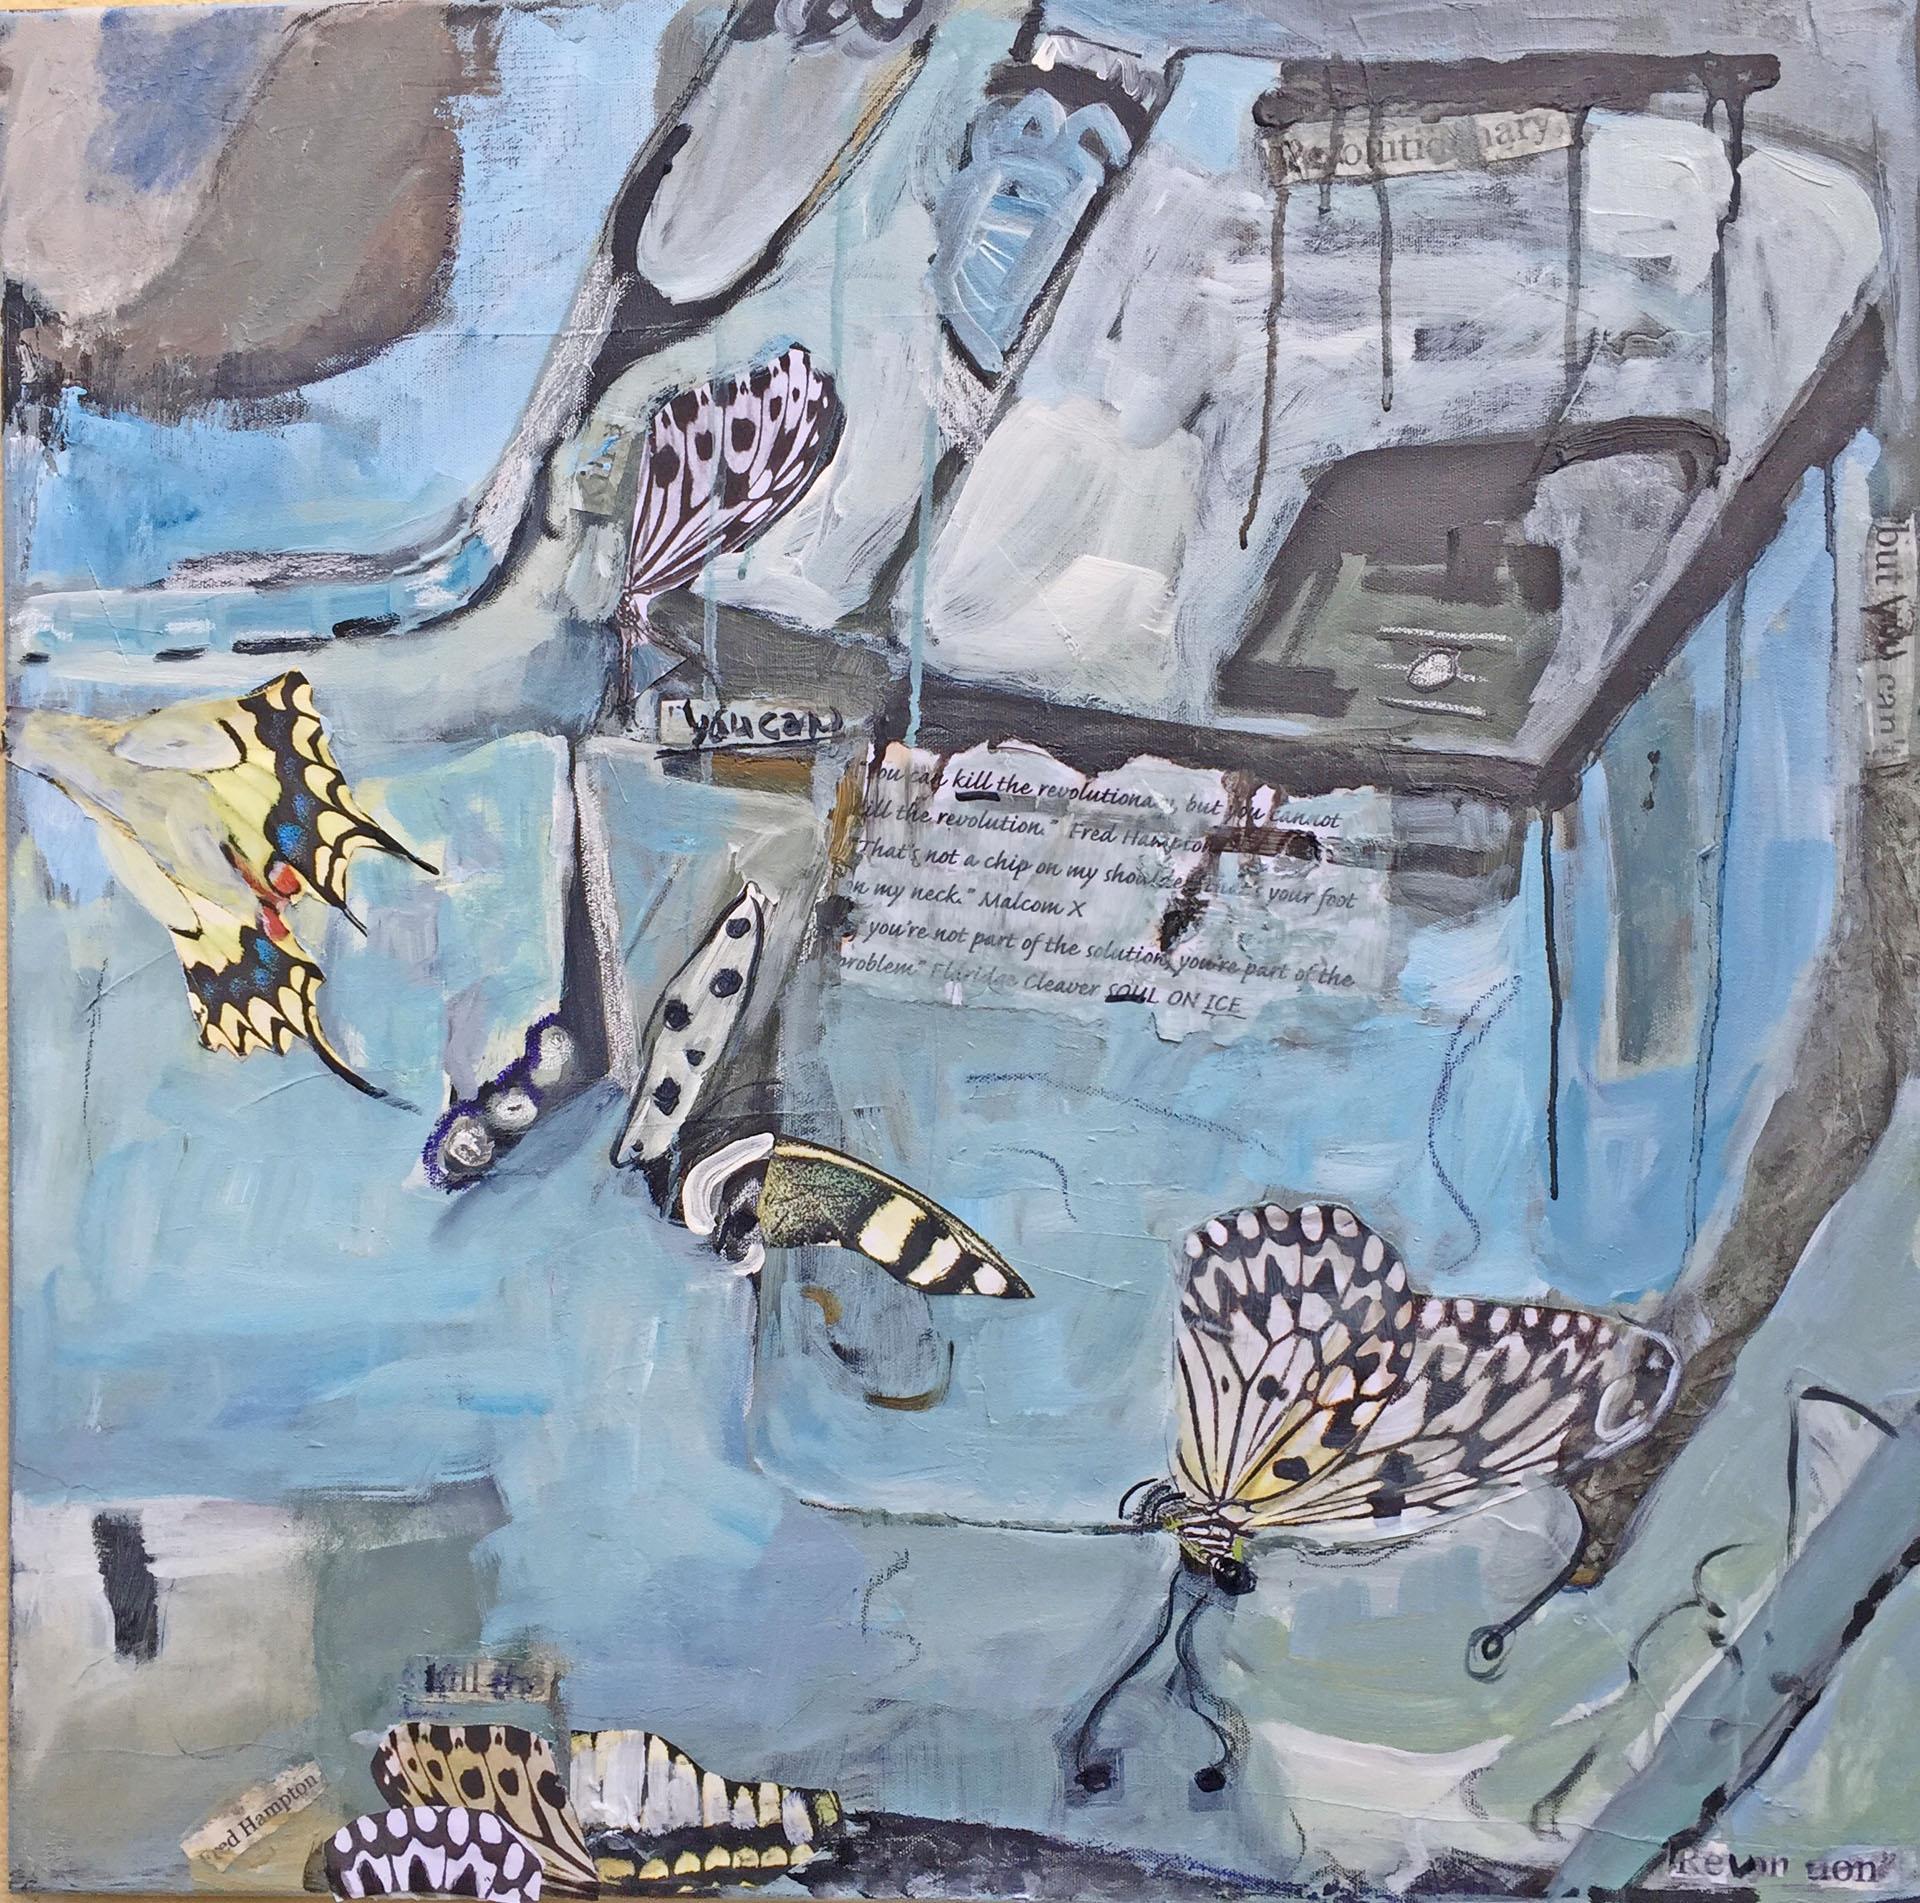 Peggy Charboneau "Soul on Ice" Acrylic on canvass, ink, collage 24x24 $1,000